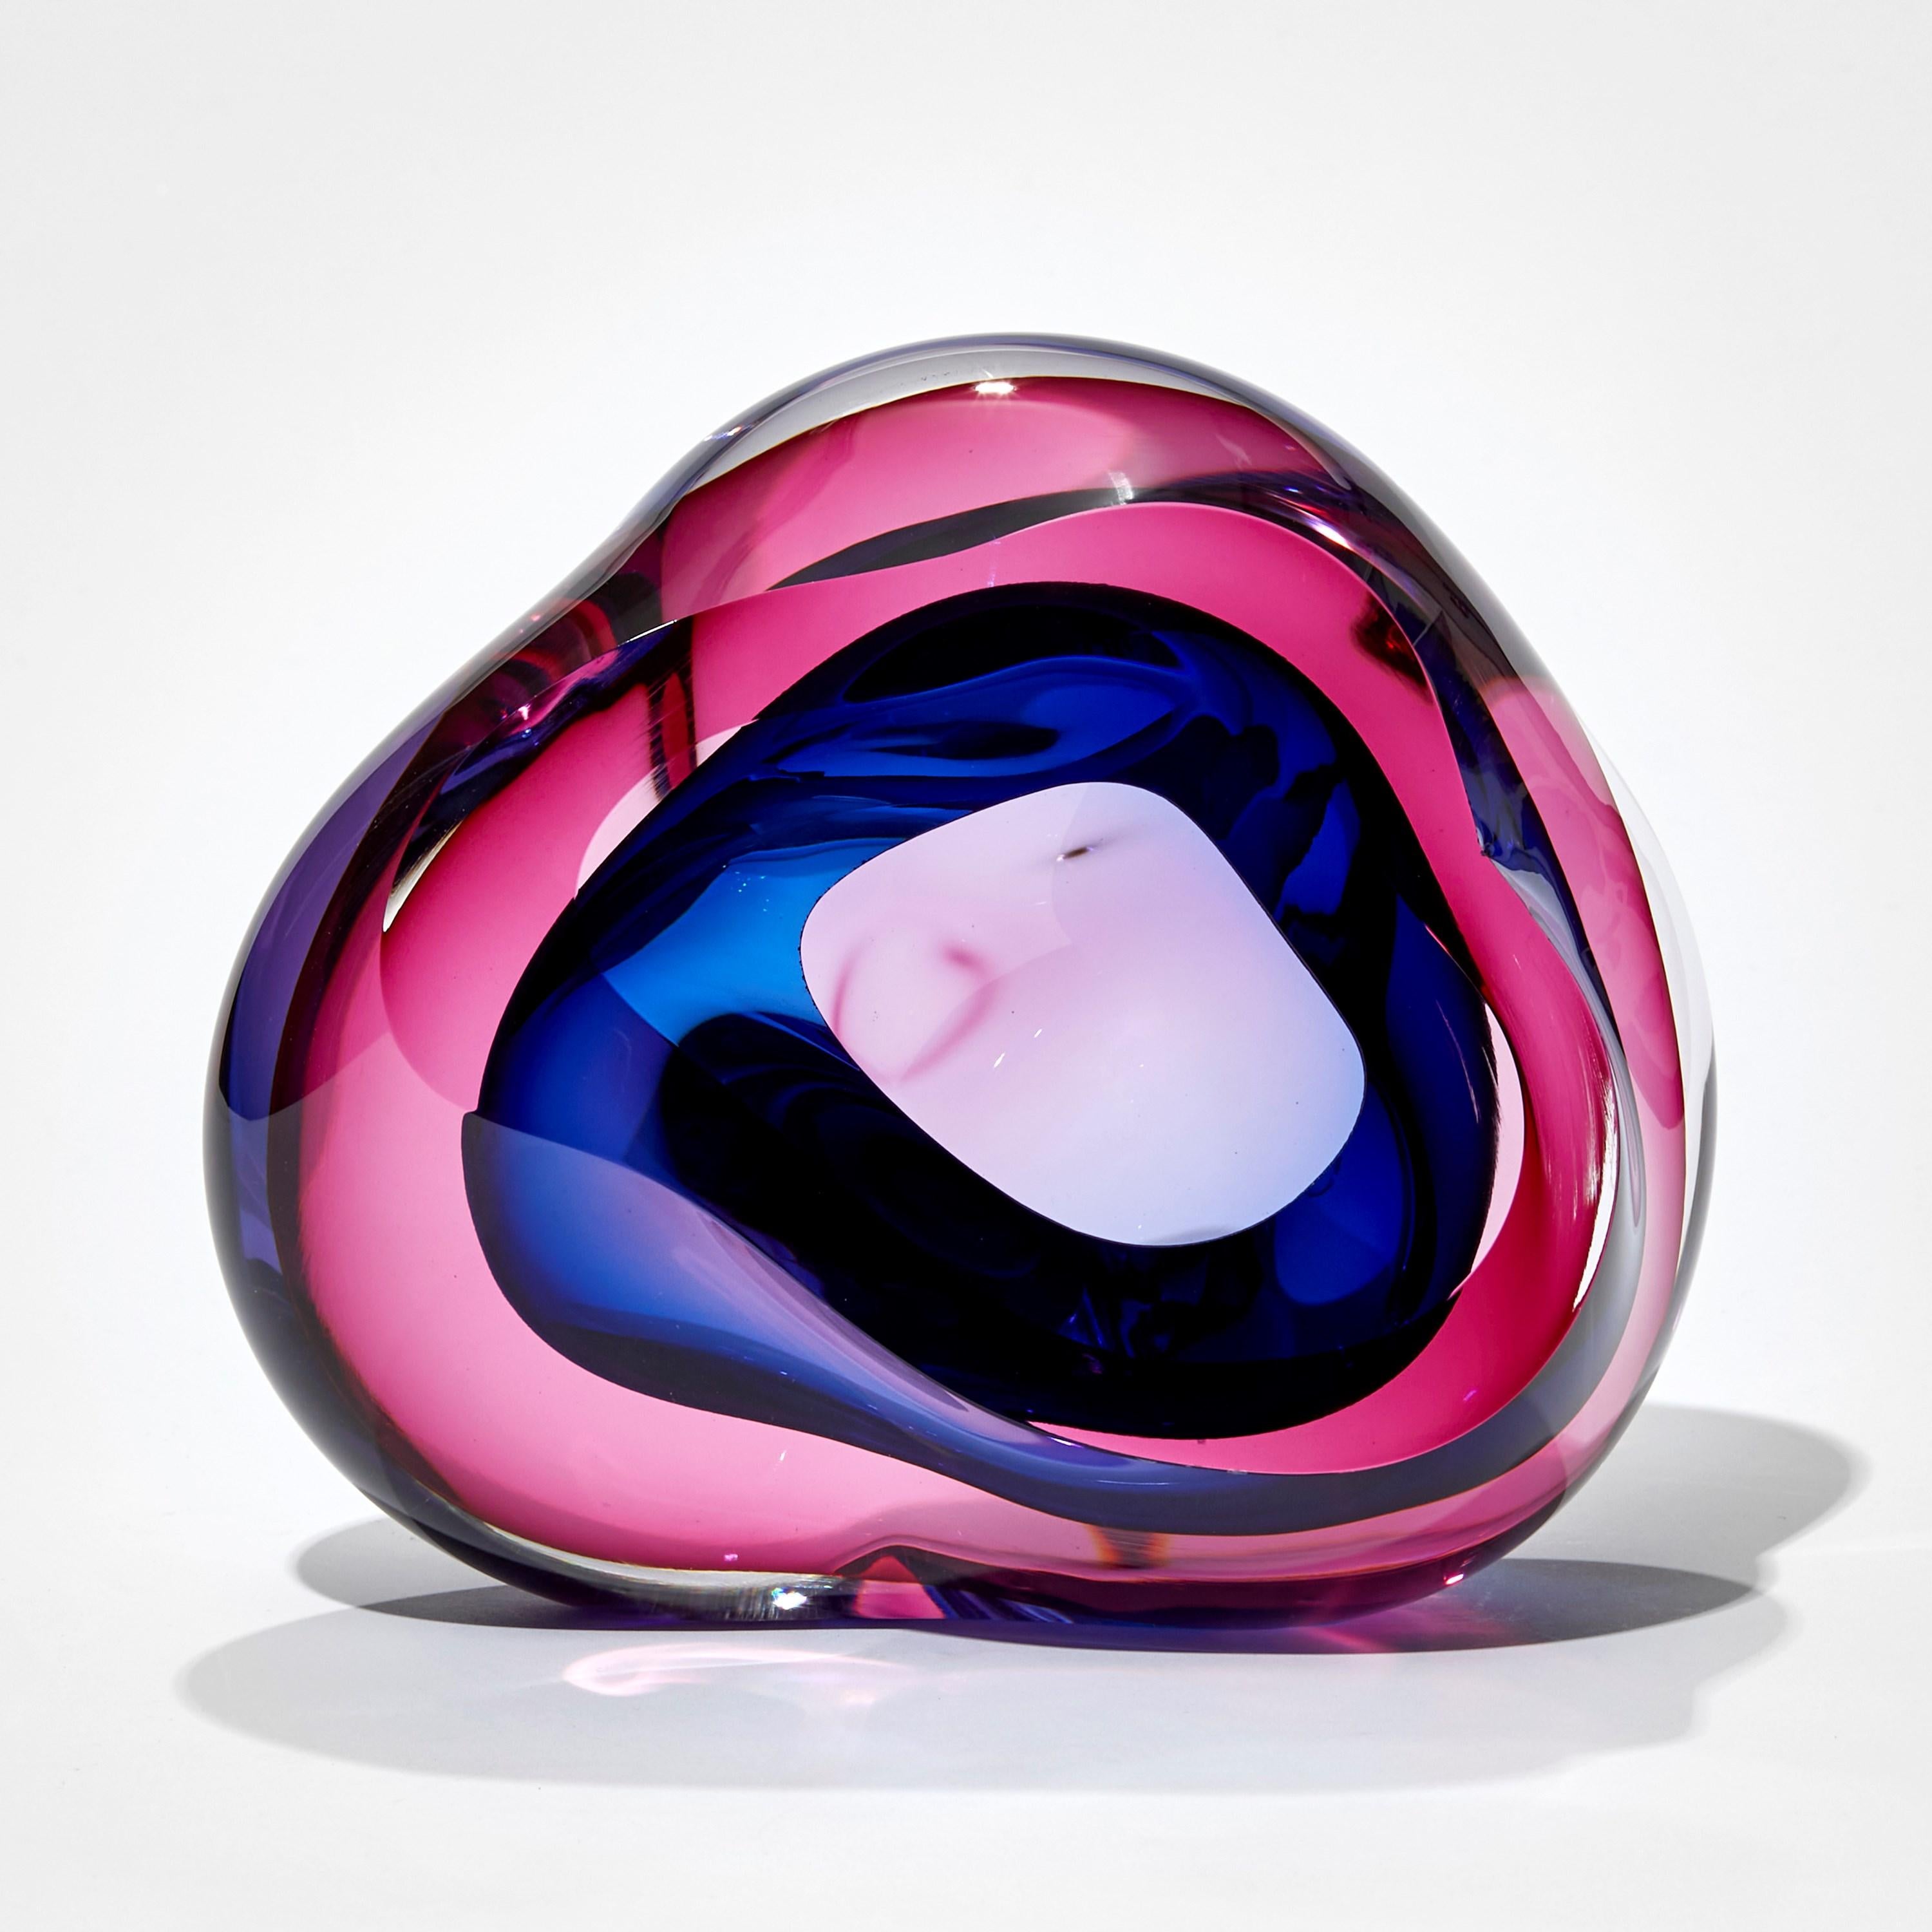 Vug in Fuchsia and blue is a unique hand-blown sculpture by the British artist Samantha Donaldson. Created by layers of colored glass in bright pink and deep blue, the transparent colors merge and create further hues throughout the piece. An